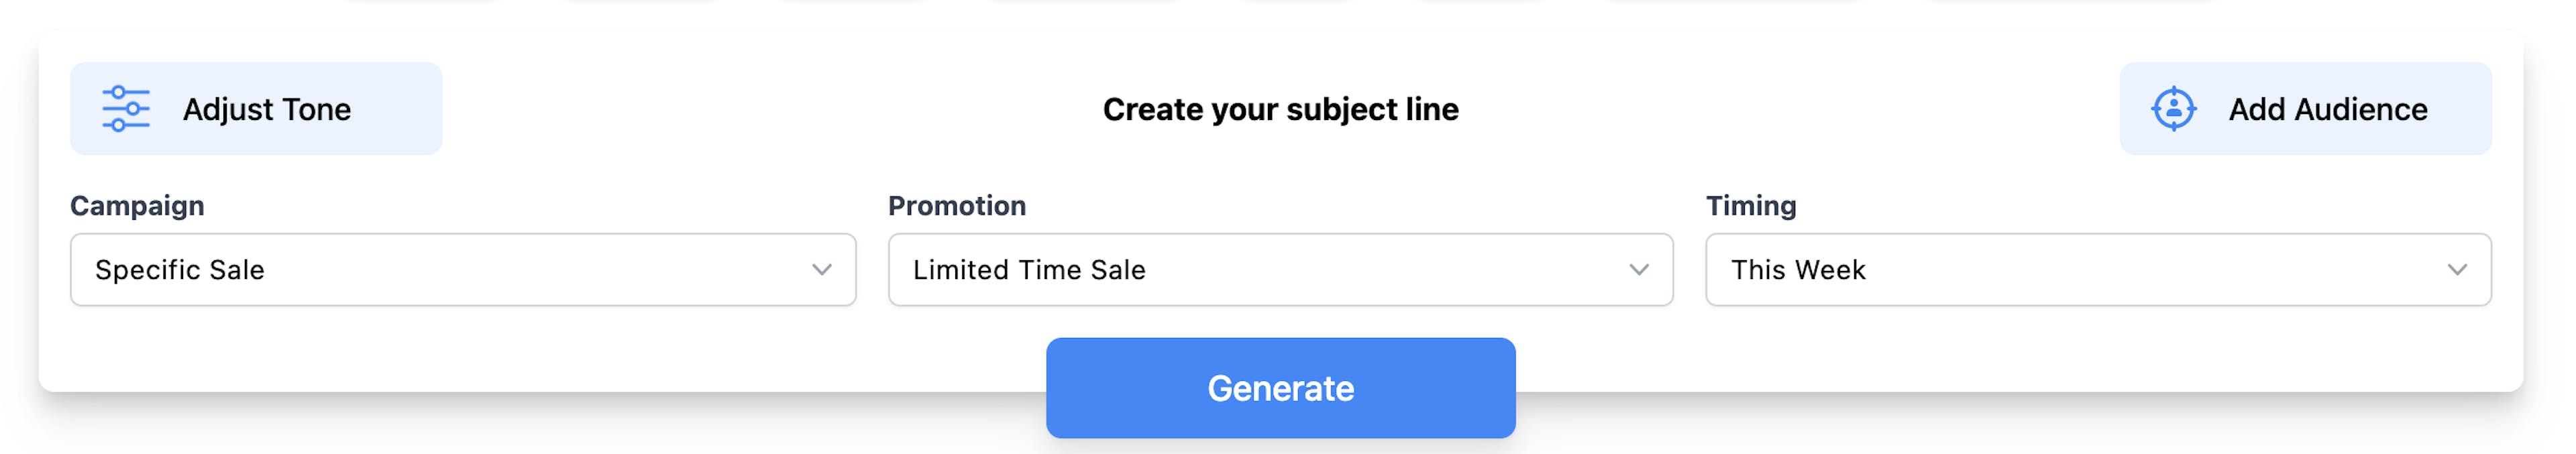 Personalized subject lines for gen x have special offers